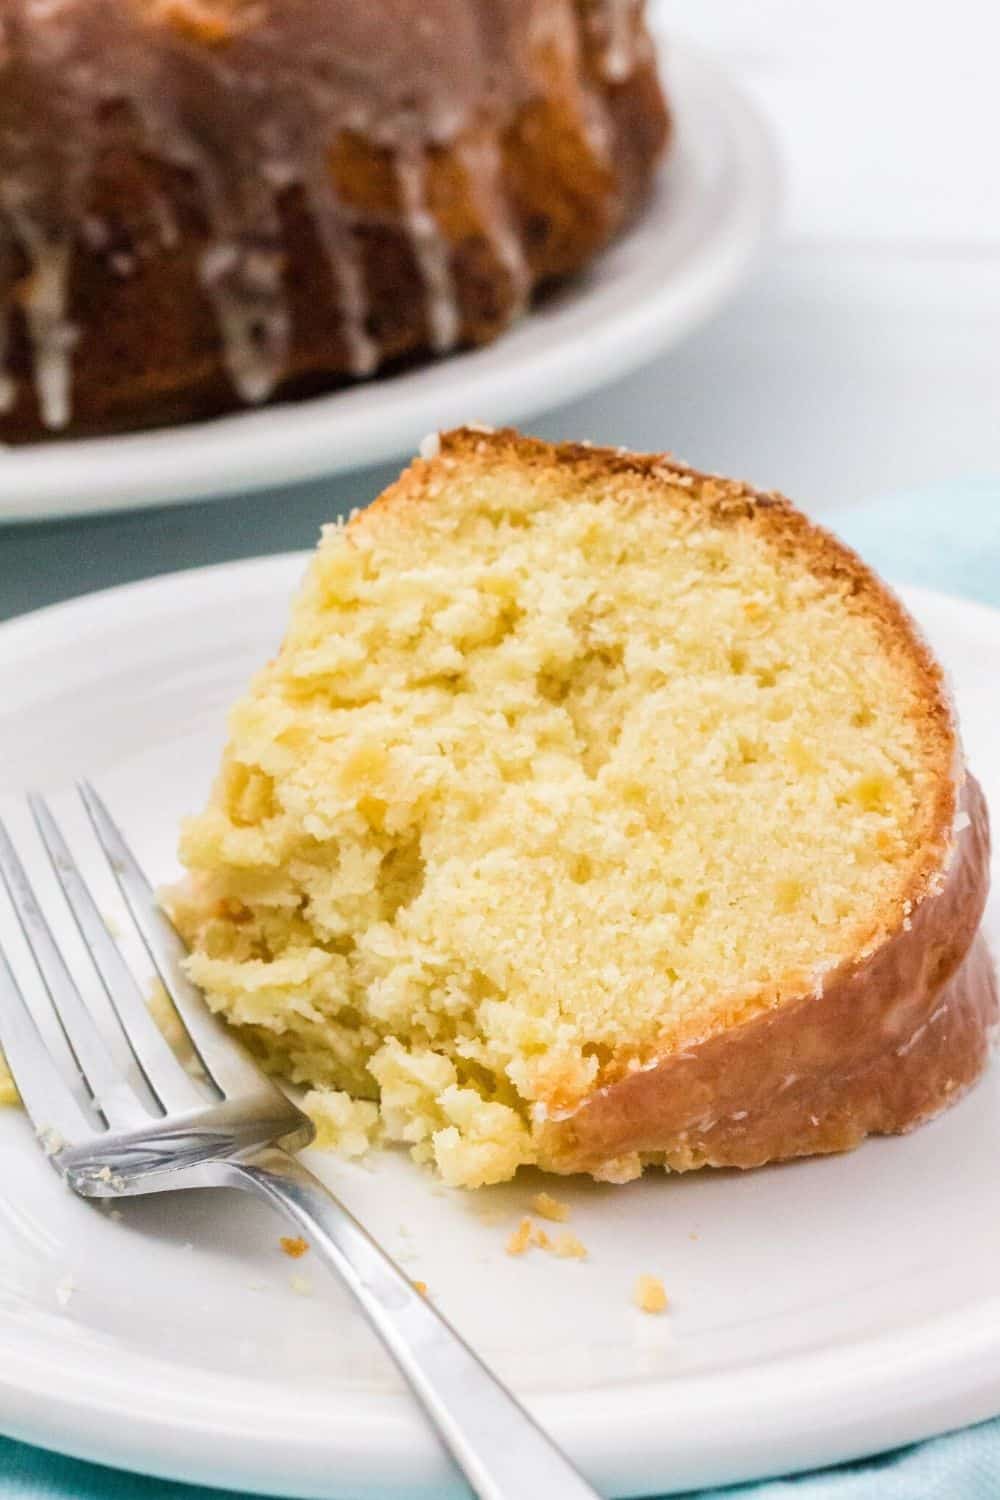 close-up view of a piece of pineapple pound cake with a bite taken out of it, served on a plate with a fork